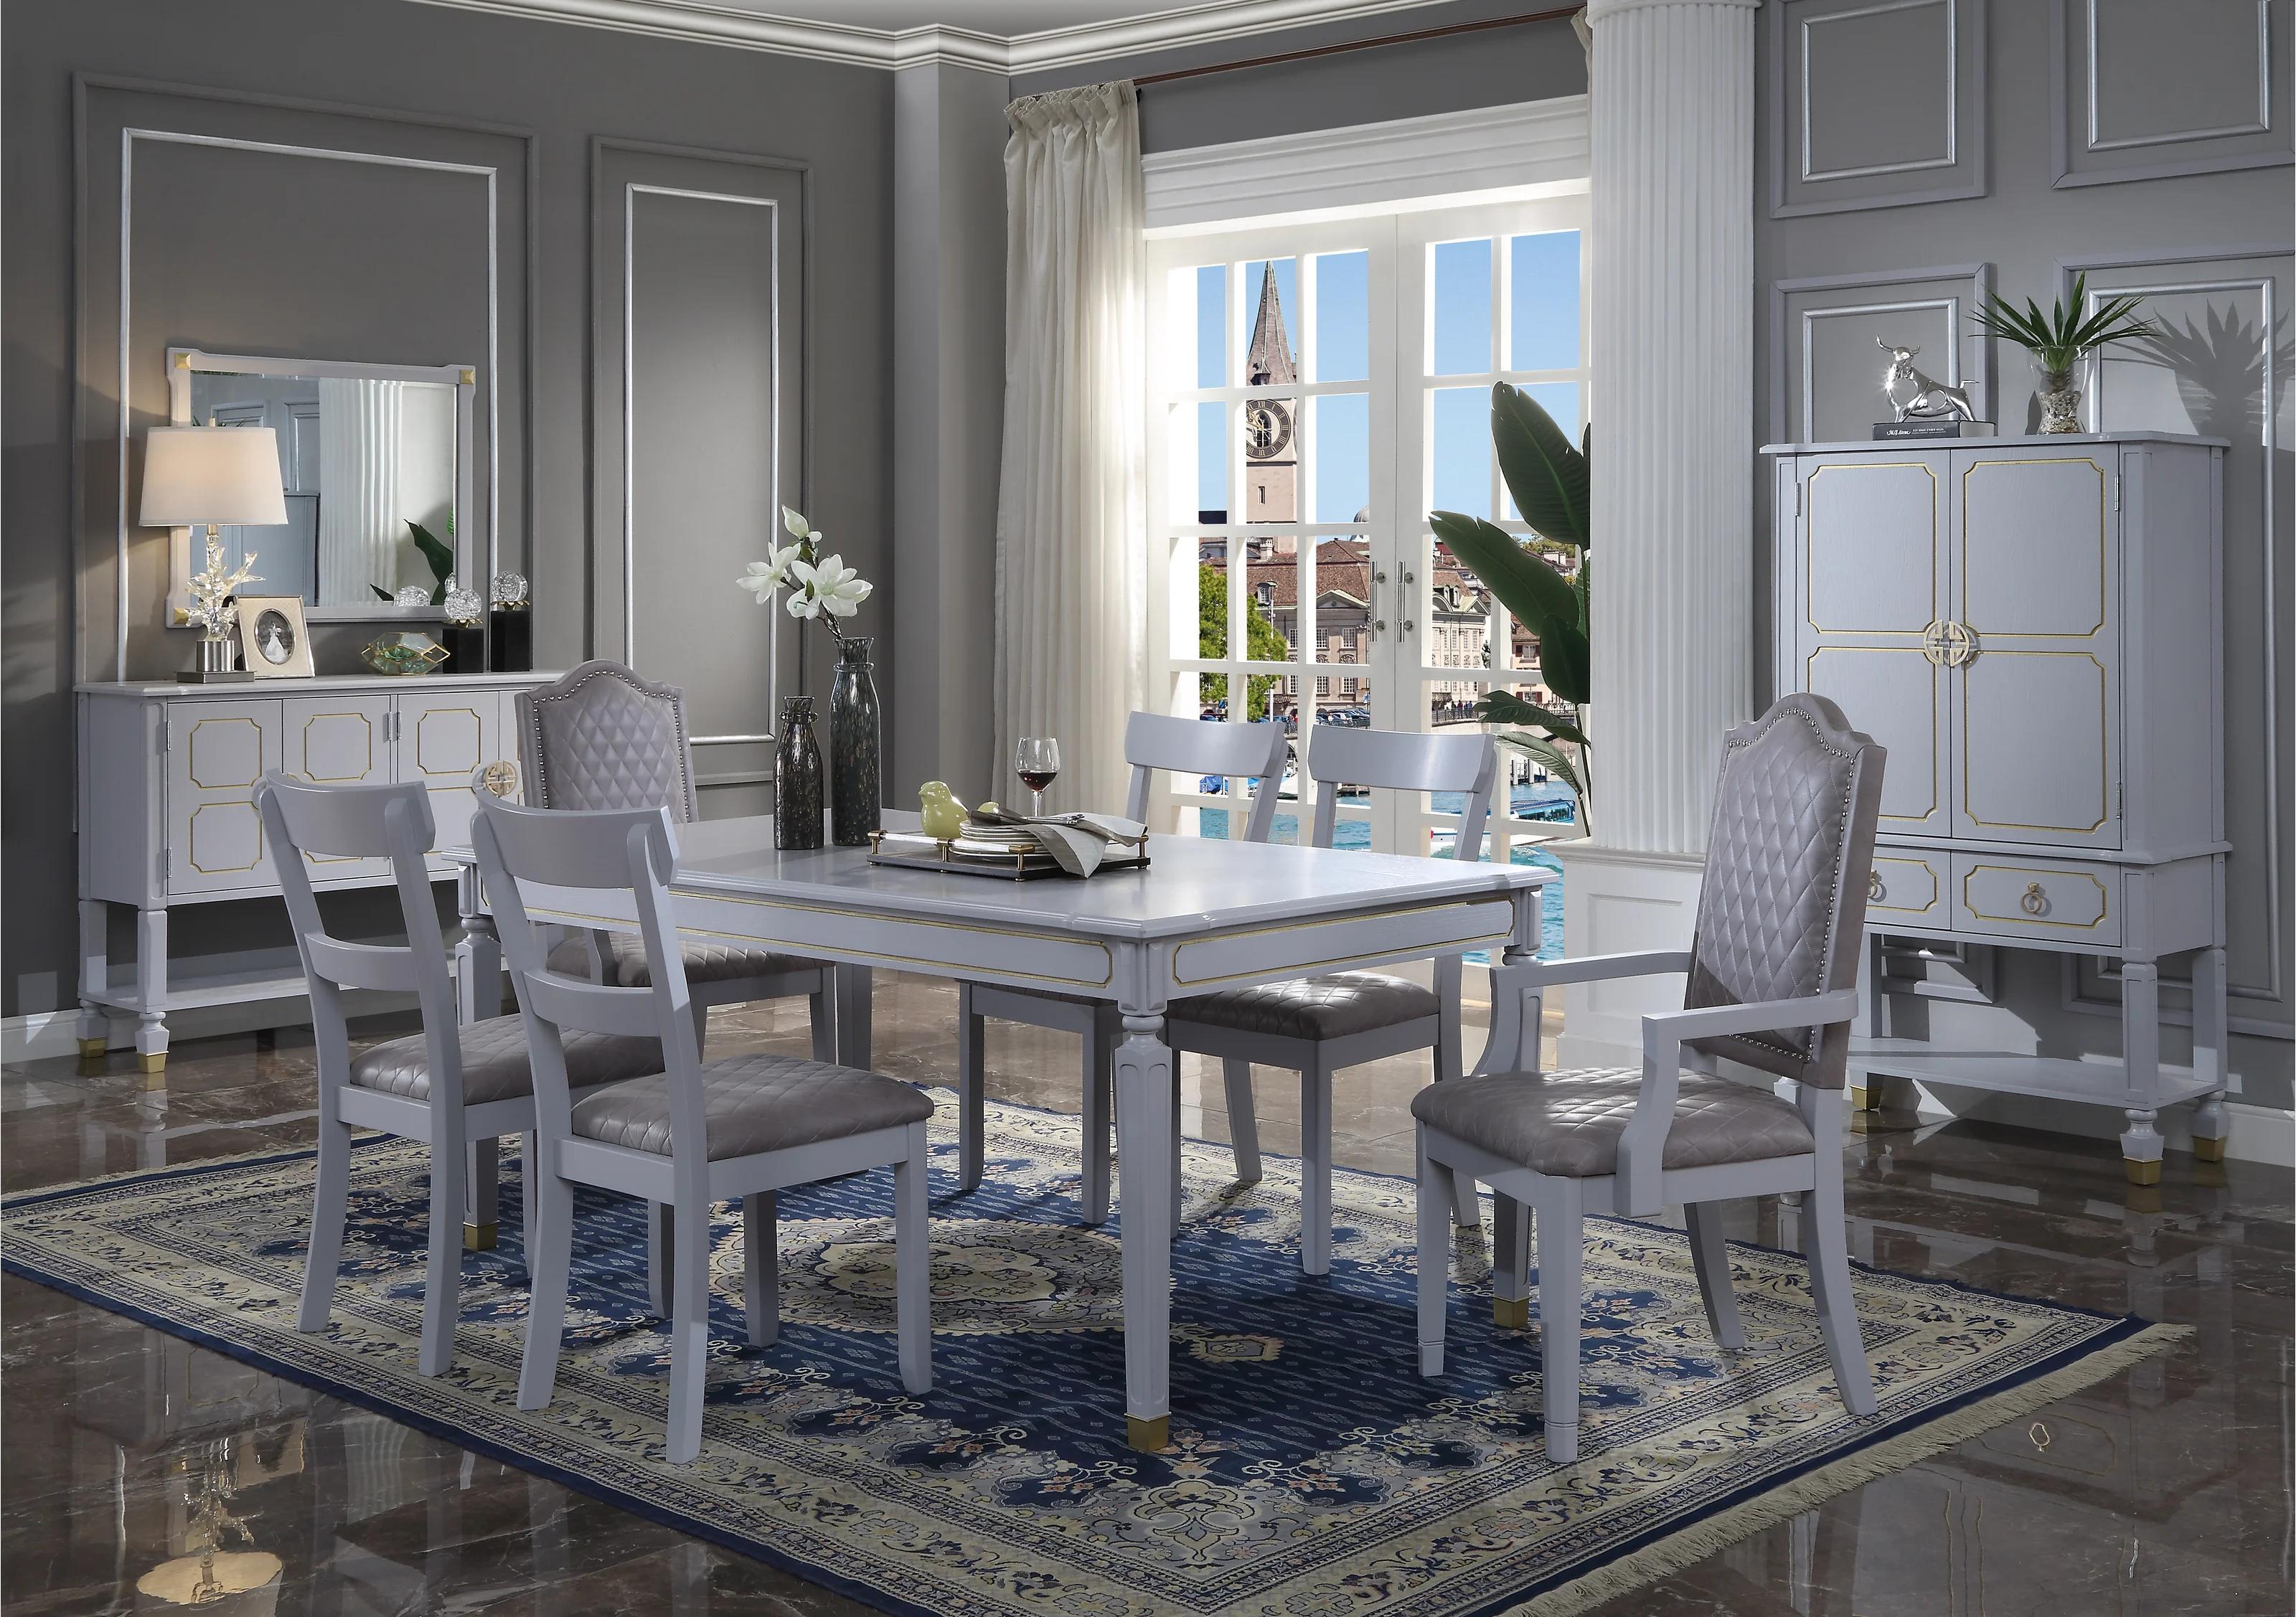 

    
Classic Pearl Gray Dining Table + 6x Chairs + Mirror + Server + Cabinet by Acme House Marchese 68860-10pcs
